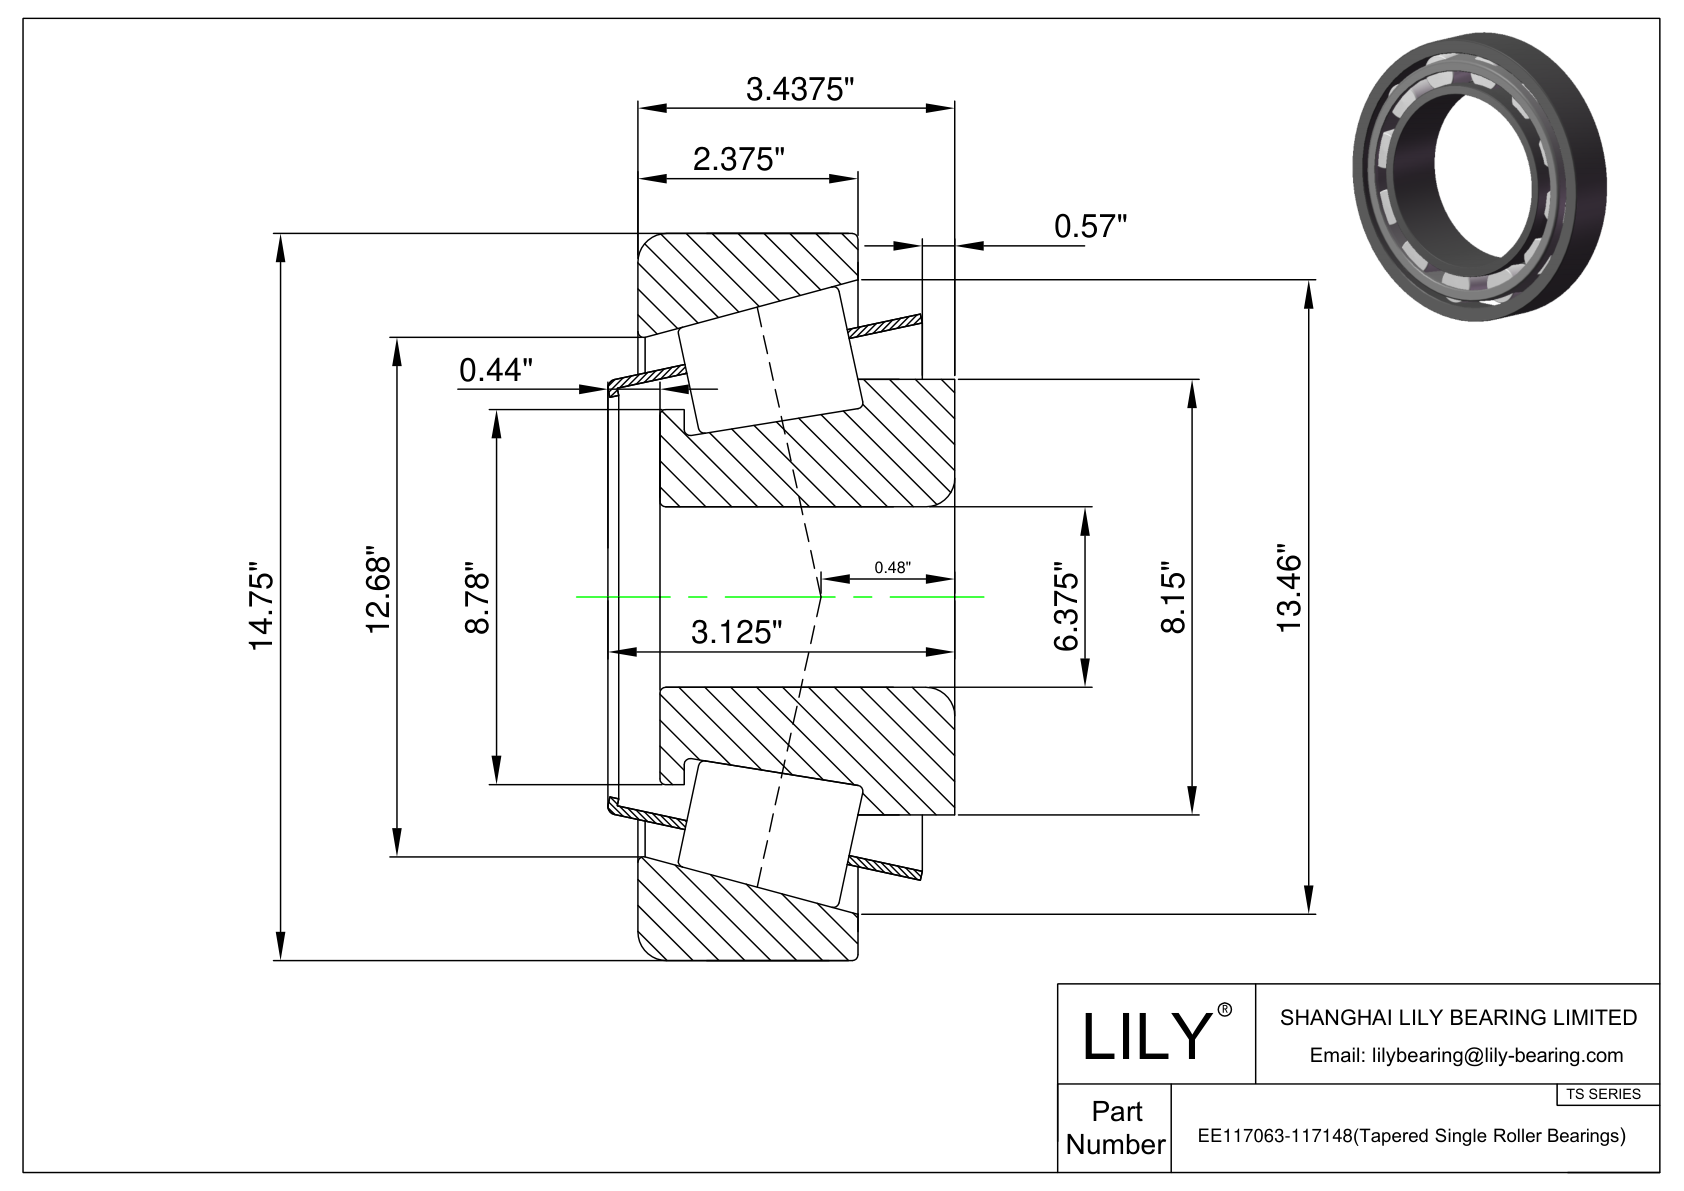 EE117063-117148 TS (Tapered Single Roller Bearings) (Imperial) cad drawing